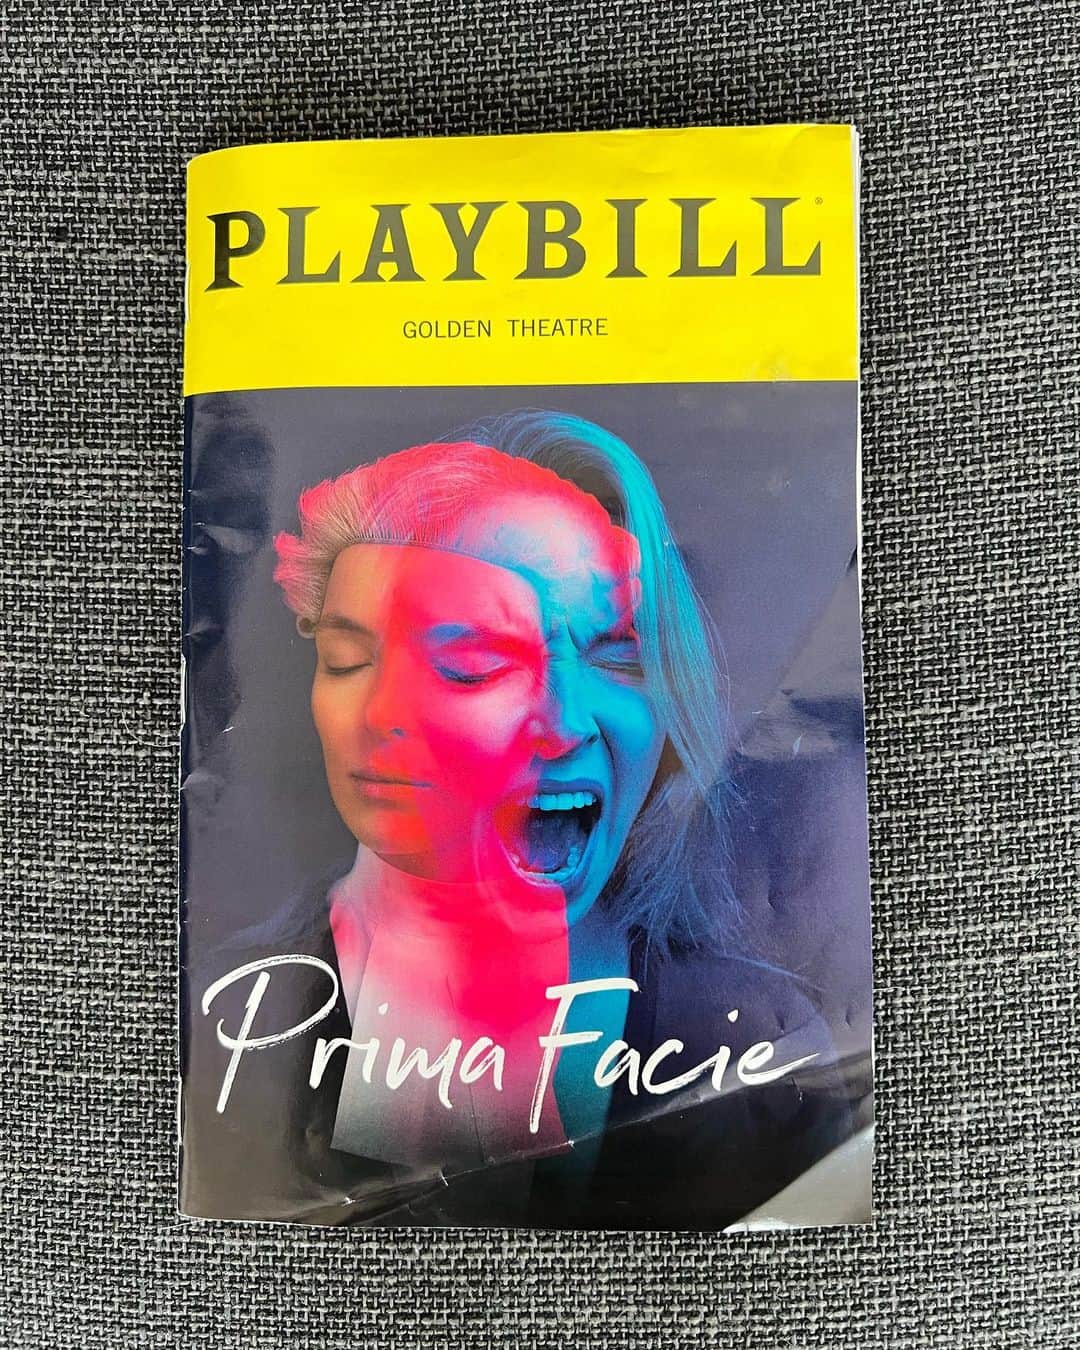 ベラミー・ヤングのインスタグラム：「It's taken me a minute to begin to digest the ENORMOUS IMPACT of getting to see @primafaciebroadwayplay  @jodiemcomer 's performance alone is a masterclass & an absolutely gutting revelation. It's an honor to have gotten to witness the work she is sharing 8 shows a week. 🤯🔥👑  Even beyond that, @suziemillerwriter has given us a gift & a challenge: as the program says best, "On the face of it, SOMETHING HAS TO CHANGE." I wanted to include the information below from the #playbill. Some of it may surprise you- or not, but there are actionable parts that I wanted to amplify so everyone, regardless of whether they get to see the show, has access.  Please consider supporting @scpconsent #SchoolsConsentProject & consider sharing your own story.  I'm sending everyone so very much love. Today & always. #PrimaFacie #Broadway ❤️  Every 98 seconds someone in the US is sexually assaulted. An estimated 735,000 rapes were reported in the US last year. It is estimated only 19% of all rapes are reported. That means that probably well over 3.8 million women were raped in the US last year. Nearly 1 in 2 women have experienced rape, sexual violence, or stalking by an intimate partner in their lifetime. In the age range 14-25 this rises to 97% of women reporting having been sexually assaulted. In 8 out of 10 rape cases, the victim knew the perpetrator. Trans women, disabled women and BIPOC women are twice as likely to be assaulted. Only about 5% of rapes reported to the police lead to an arrest. 97.5% of all sexual assault perpetrators arrested walk free. Approximately 70 women commit suicide every day in the US following an act of sexual violence.  It costs around $10 to educate a young person about consent. The Schools Consent Project is a charity sending lawyers into schools, to teach 11-18 year olds the legal definition of consent and certain sexual offences (sexual assault, rape, 'sexting, etc). We have educated over 35,000 young people about consent. Our goal is to normalise conversations about consent, to empower young people to identify and communicate their own boundaries, and to respect them in others. To book a workshop at your school visit schoolsconsentproject.com」